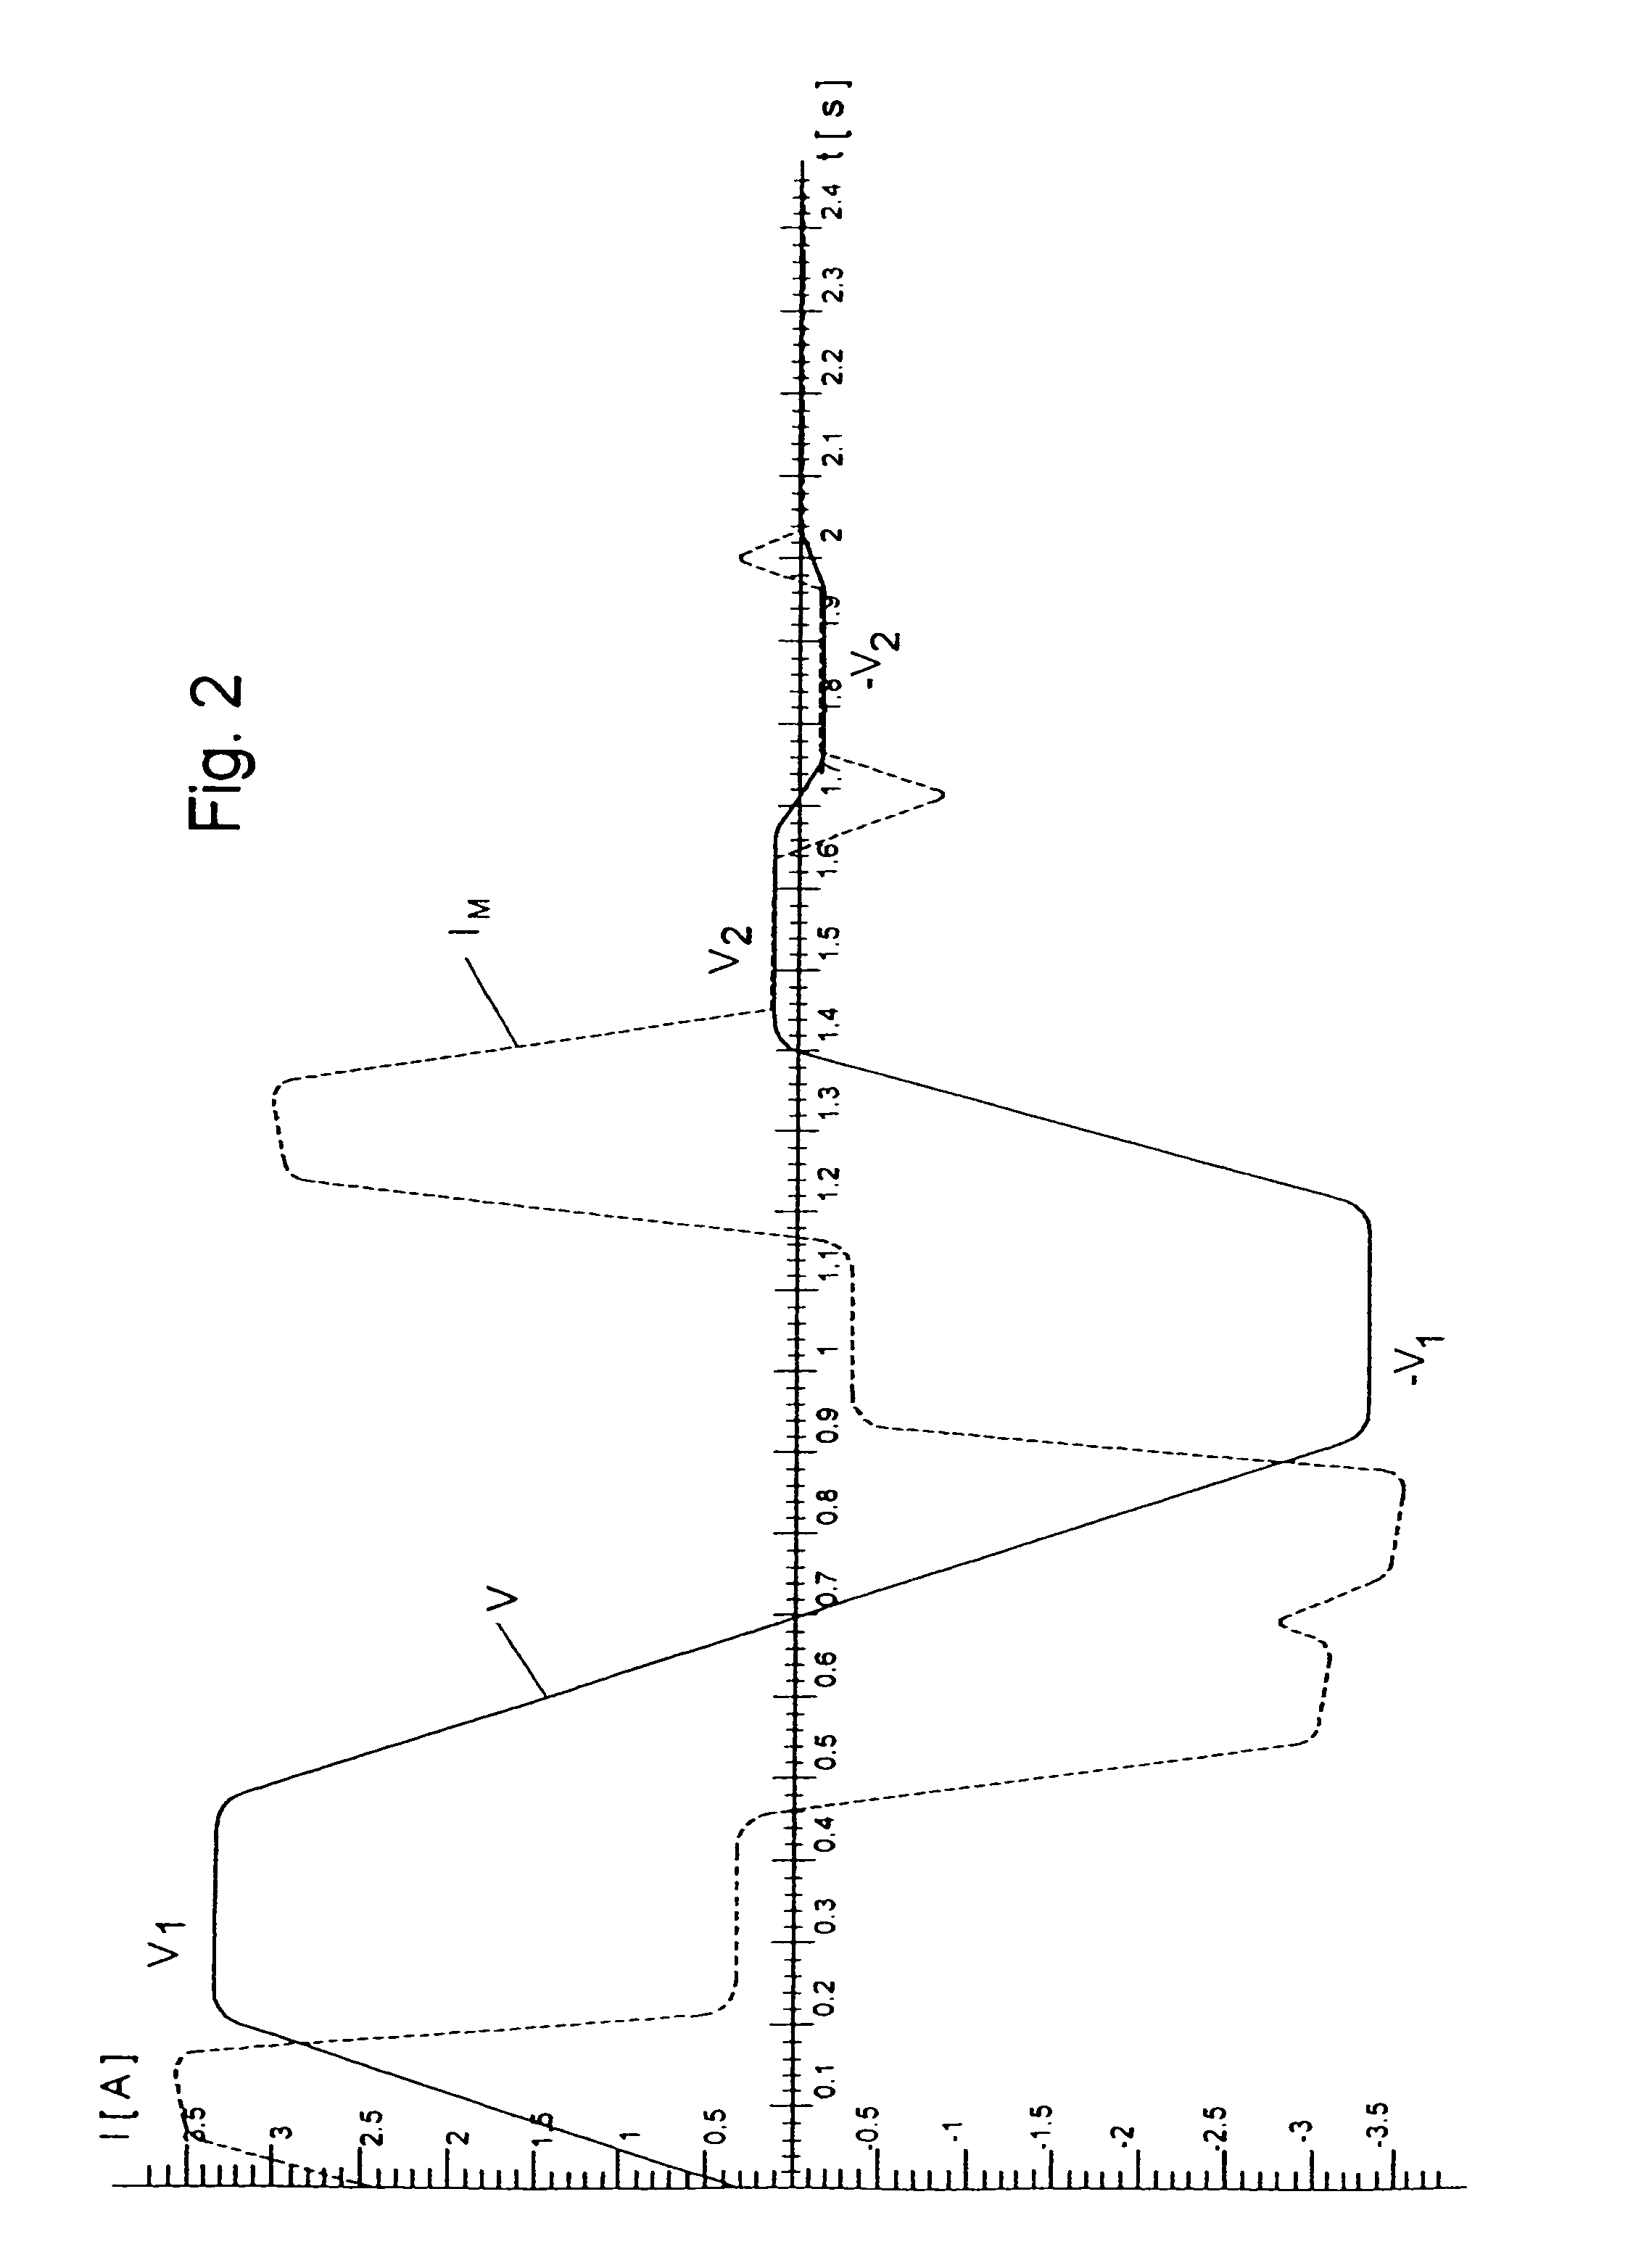 Method for determining the mass moment of inertia of an electric motor drive system